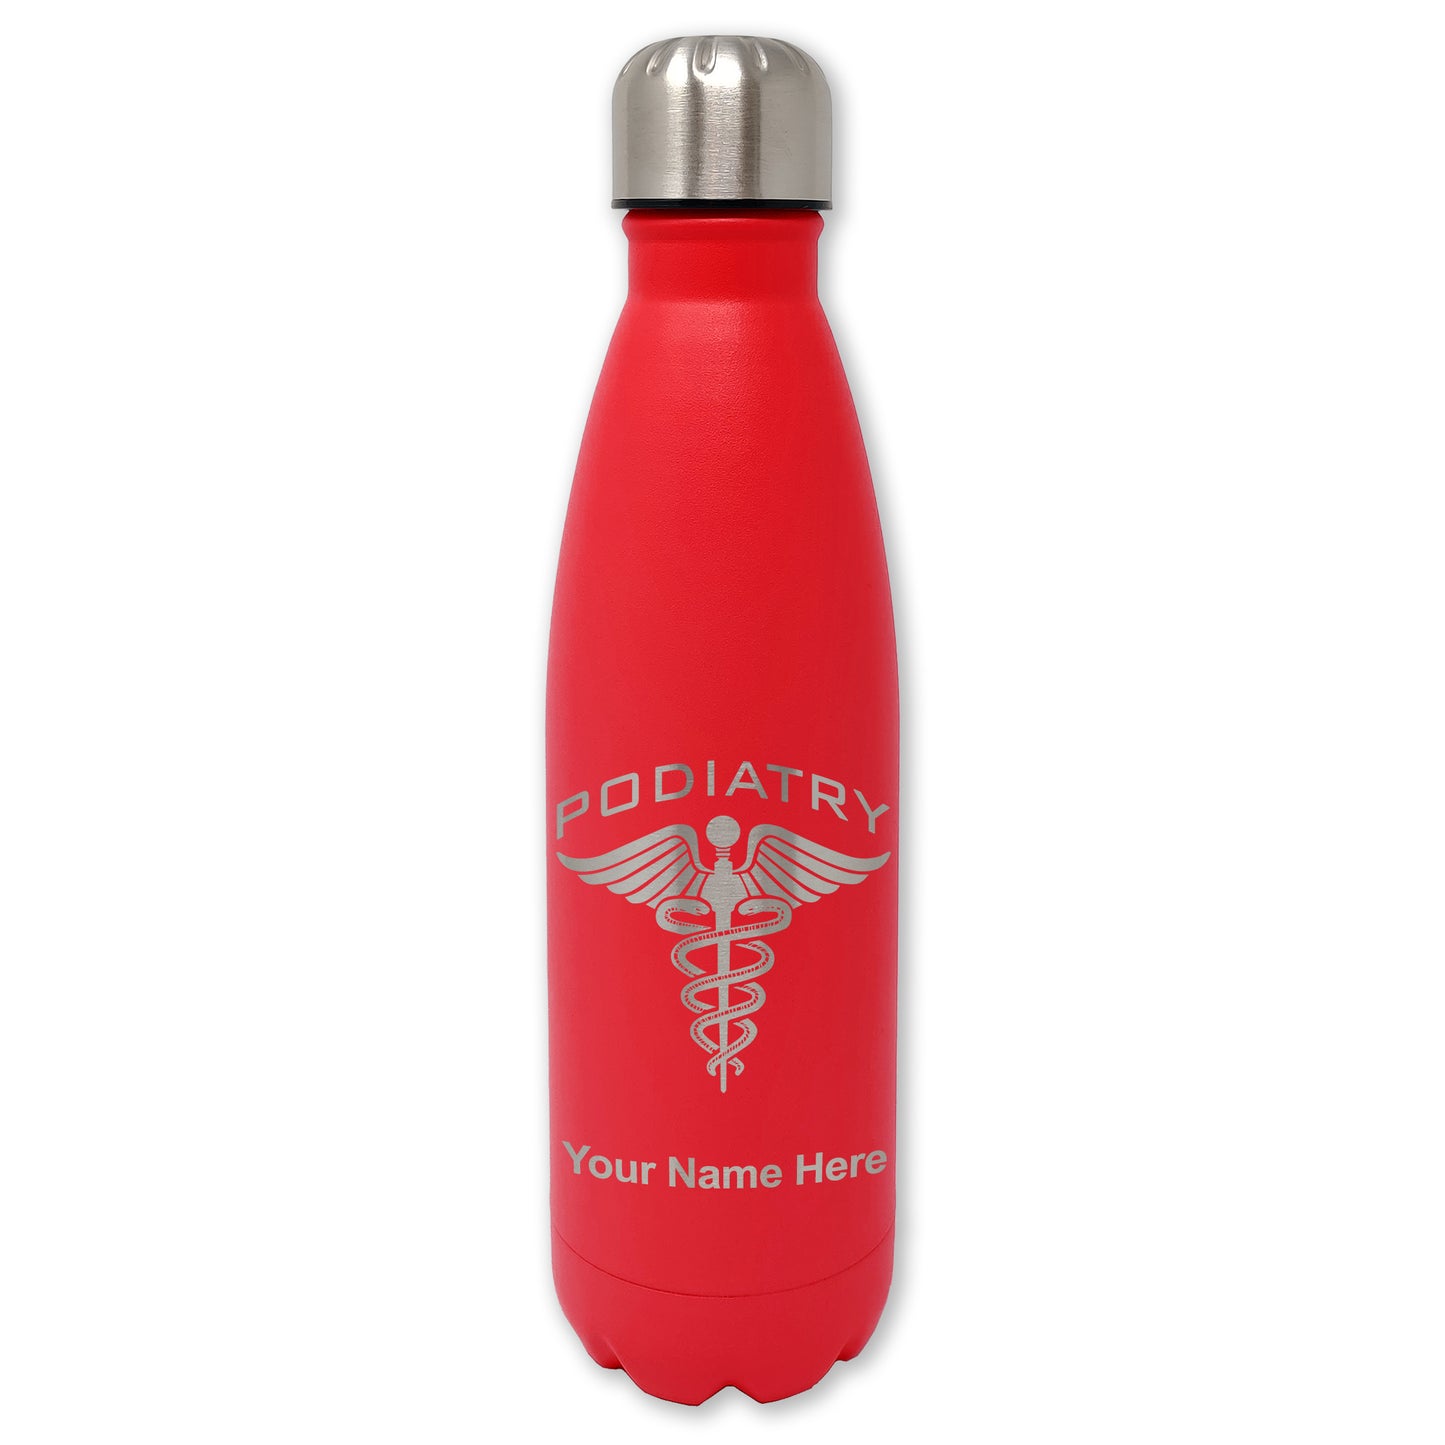 LaserGram Double Wall Water Bottle, Podiatry, Personalized Engraving Included